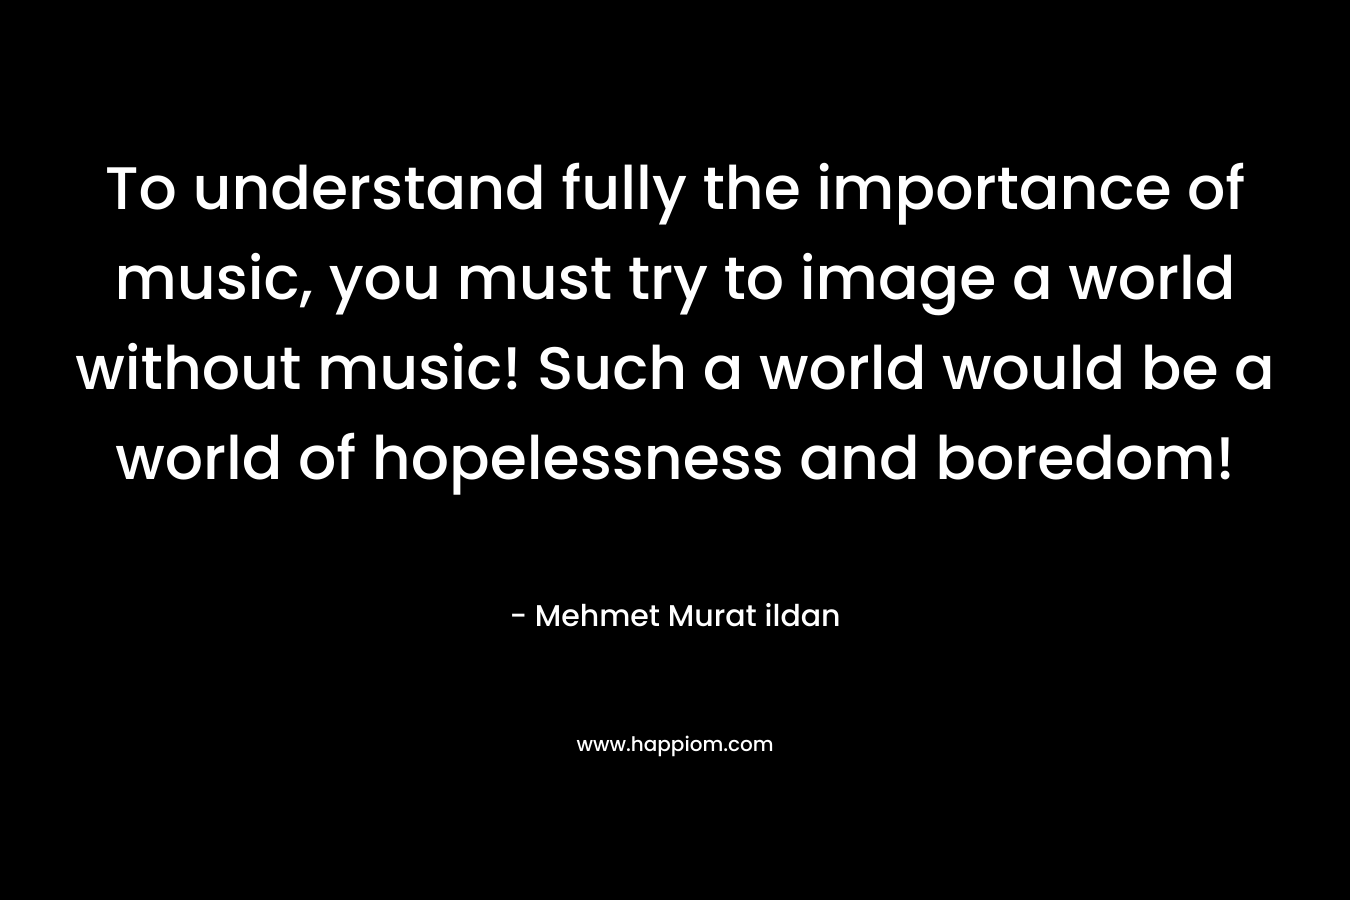 To understand fully the importance of music, you must try to image a world without music! Such a world would be a world of hopelessness and boredom!